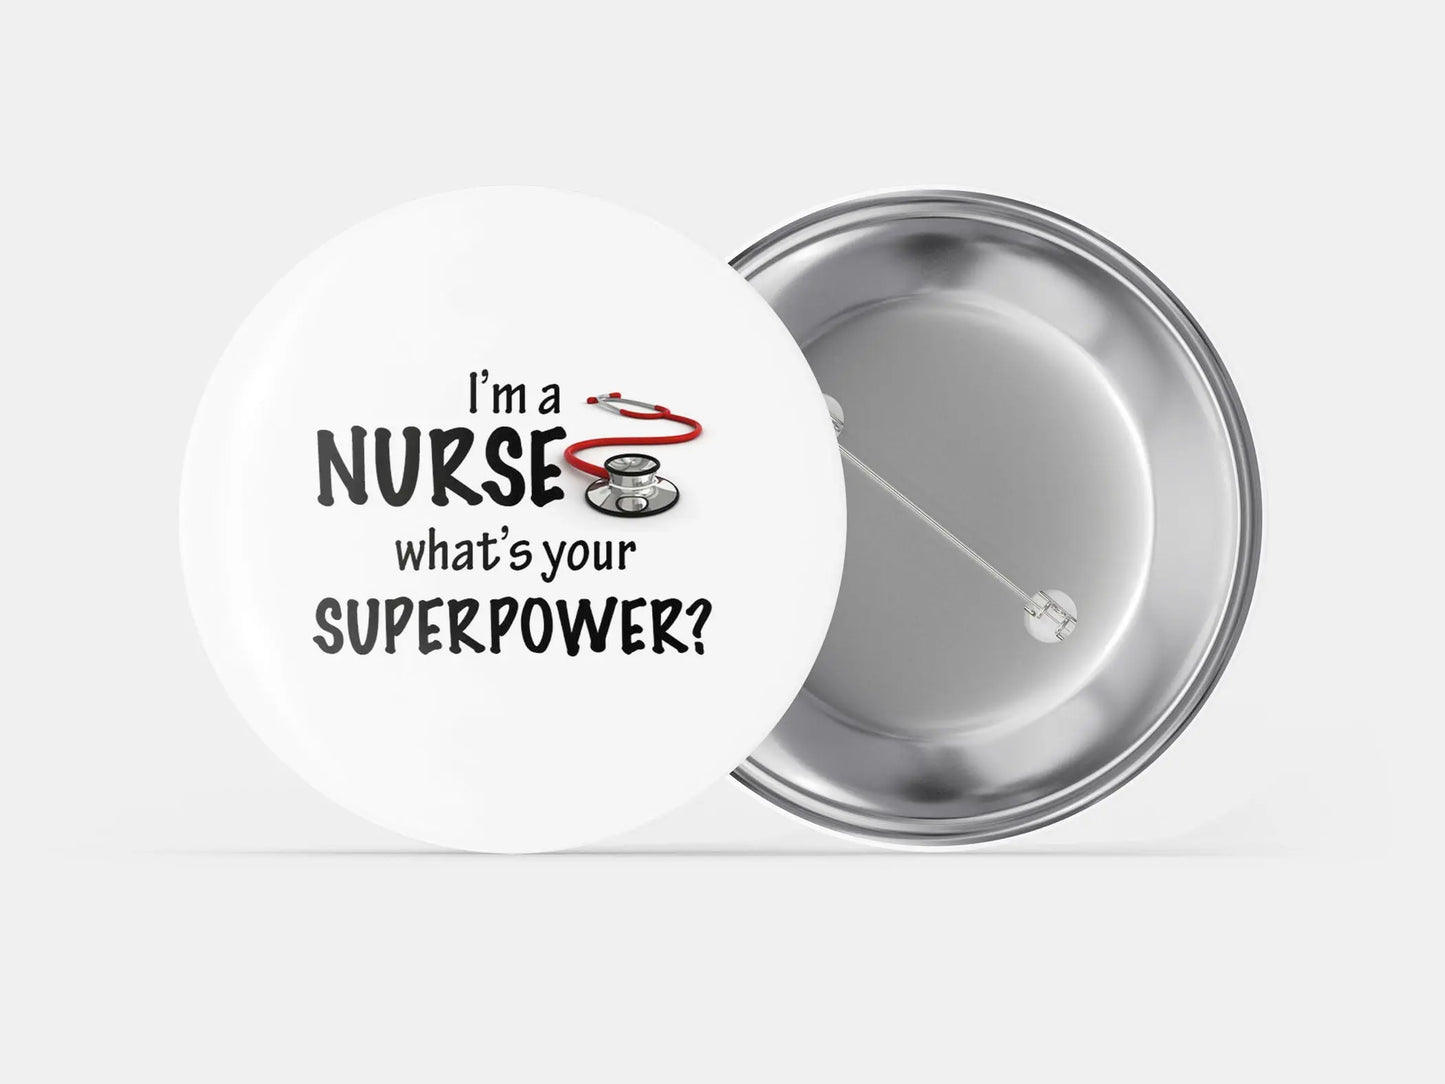 Nurse Superpower - Medical Nurse Badge - Health Personalized Giveaways - Profession Career Button Pins - 10 pieces - Busybee Creates